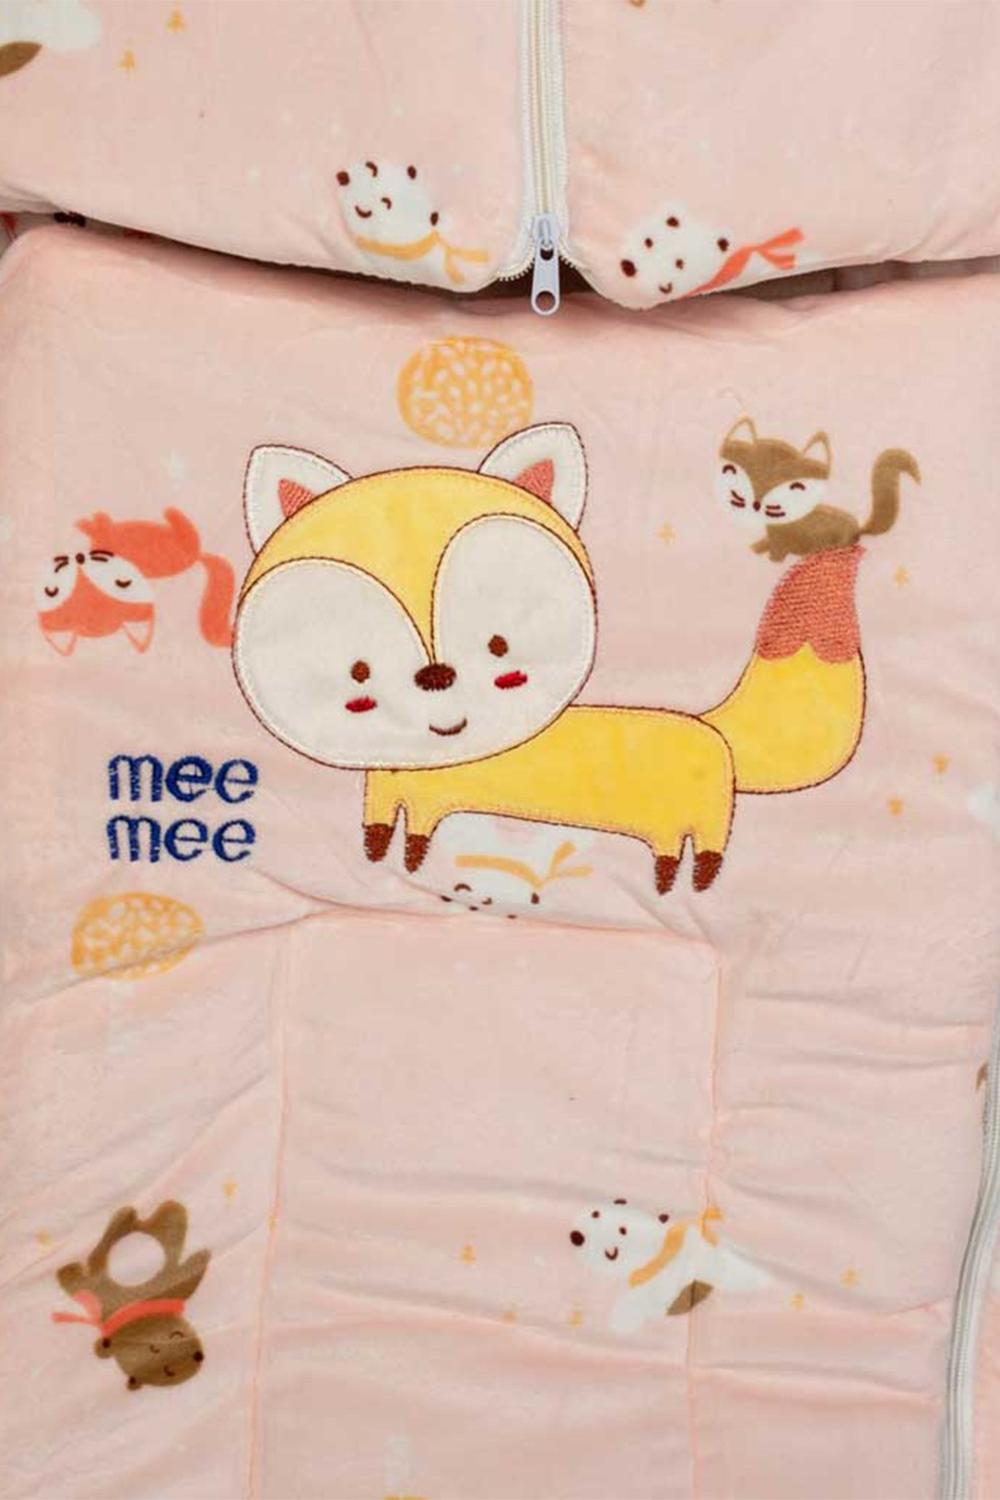 Mee Mee 3 in 1 Baby Carry Nest with Sleeping Bag and Mattress for Babies (Pink Cat Print)